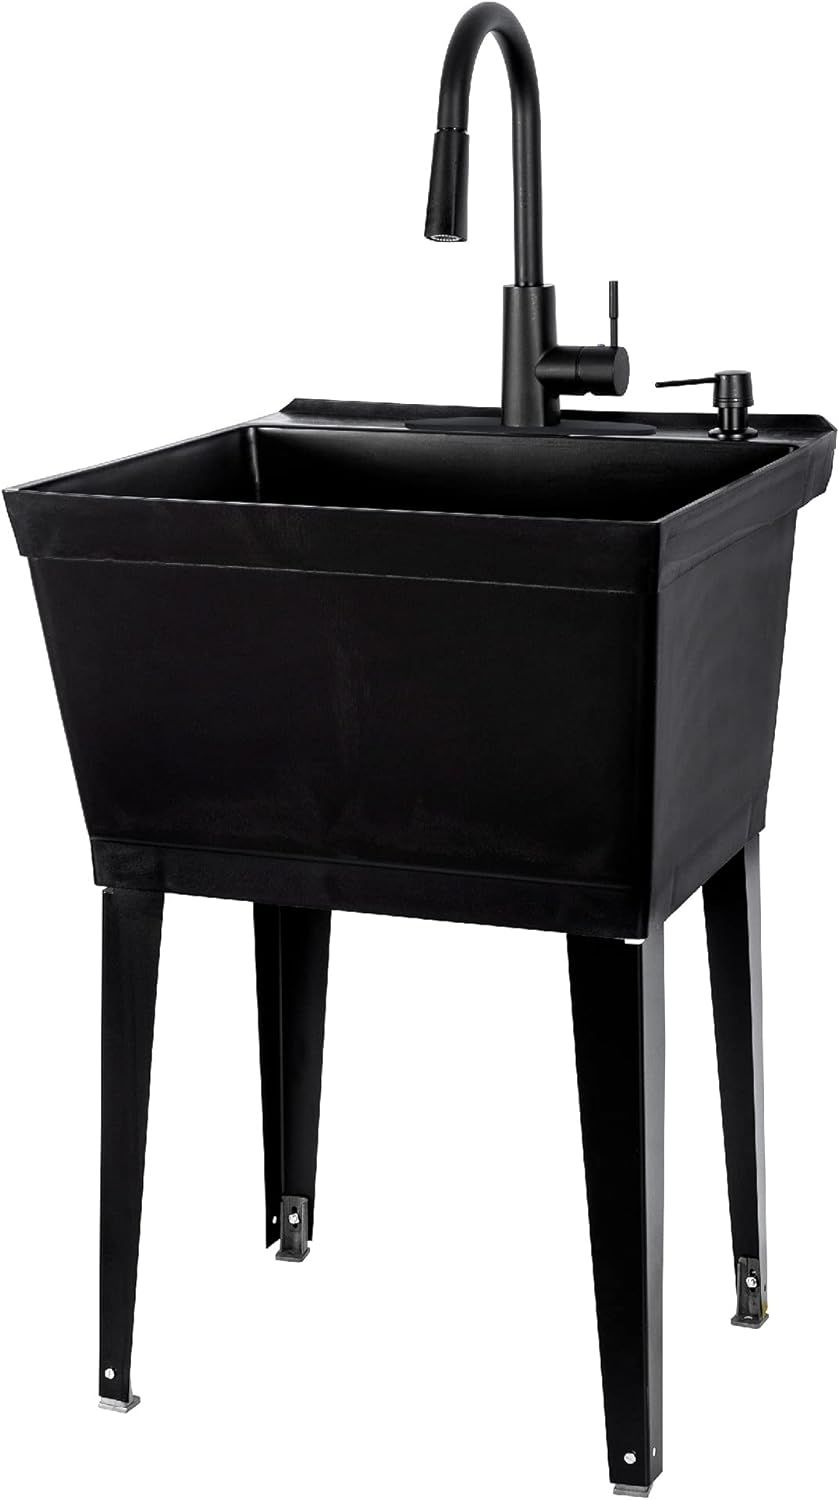 Black Utility Sink with High Arc Black Faucet by VETTA by JS Jackson Supplies, Pull Down Sprayer ... | Amazon (US)